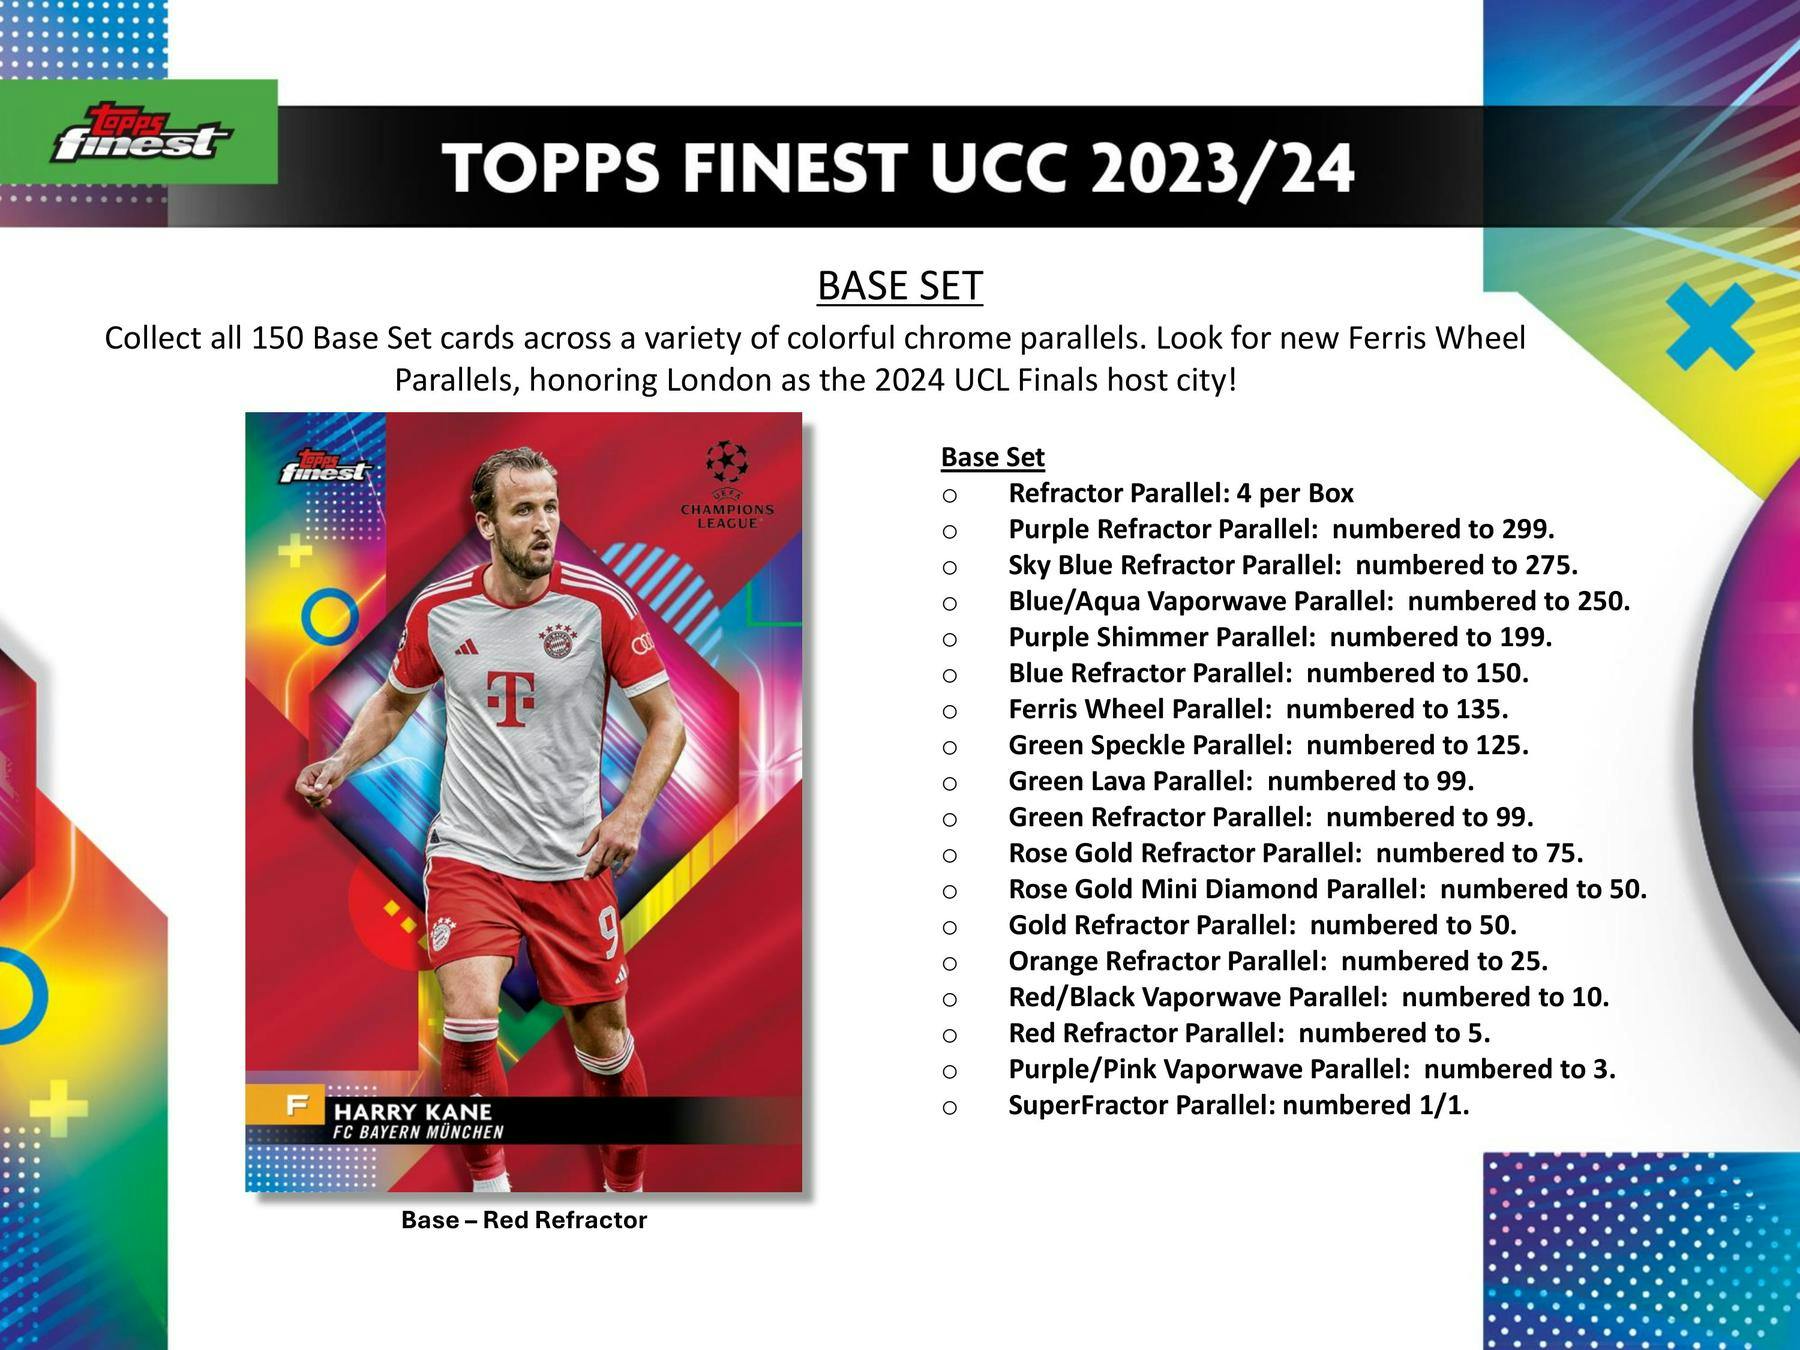 2023-24 Topps Finest UEFA Club Competitions Soccer Hobby Box 887521127221 - King Card Canada